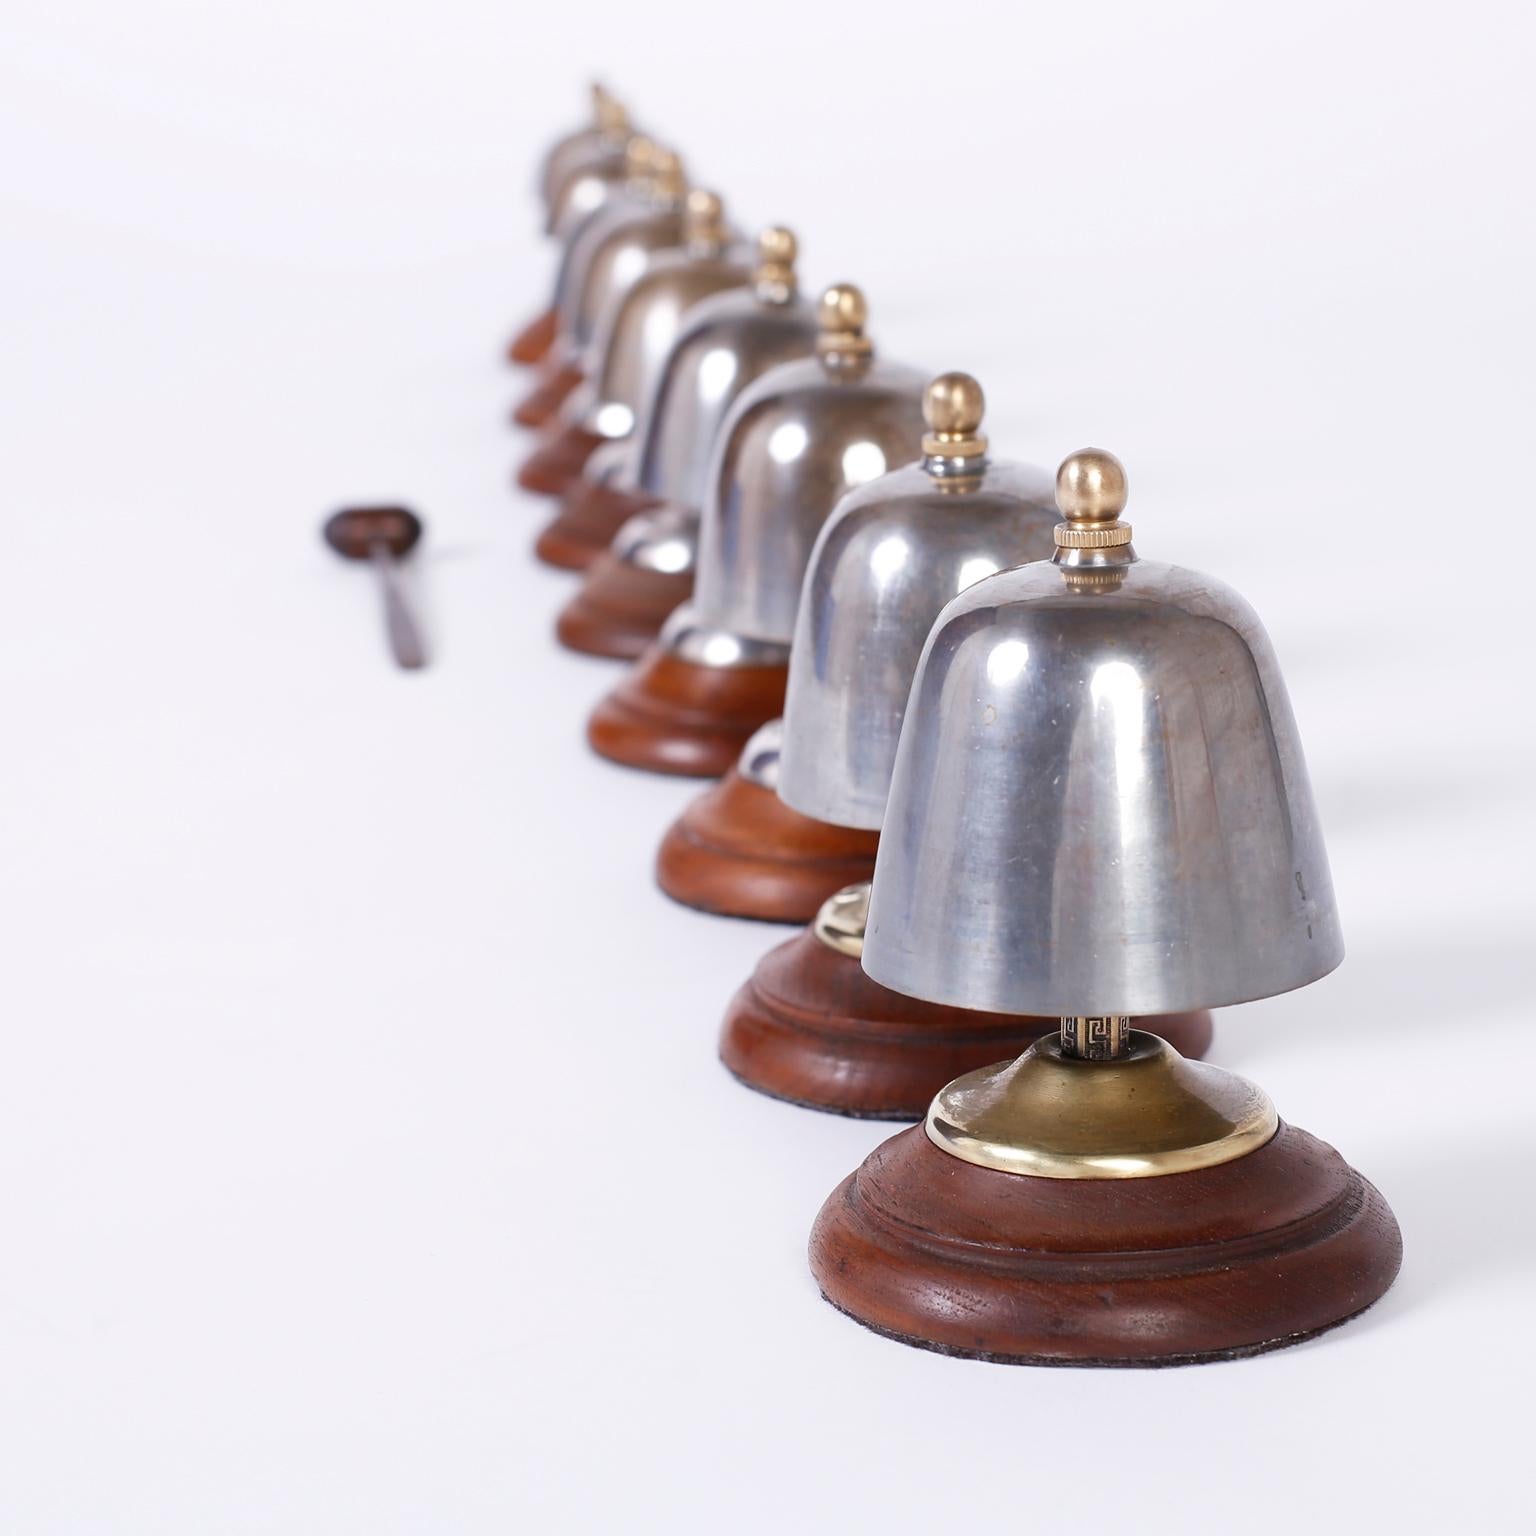 Intriguing antique set of nine bells crafted in steel with a crisp clear ring in the scale of a major. Featuring brass posts with Greek key designs, brass caps and finials, hand carved mallet and turned mahogany bases.

Bell heights range from 4.5